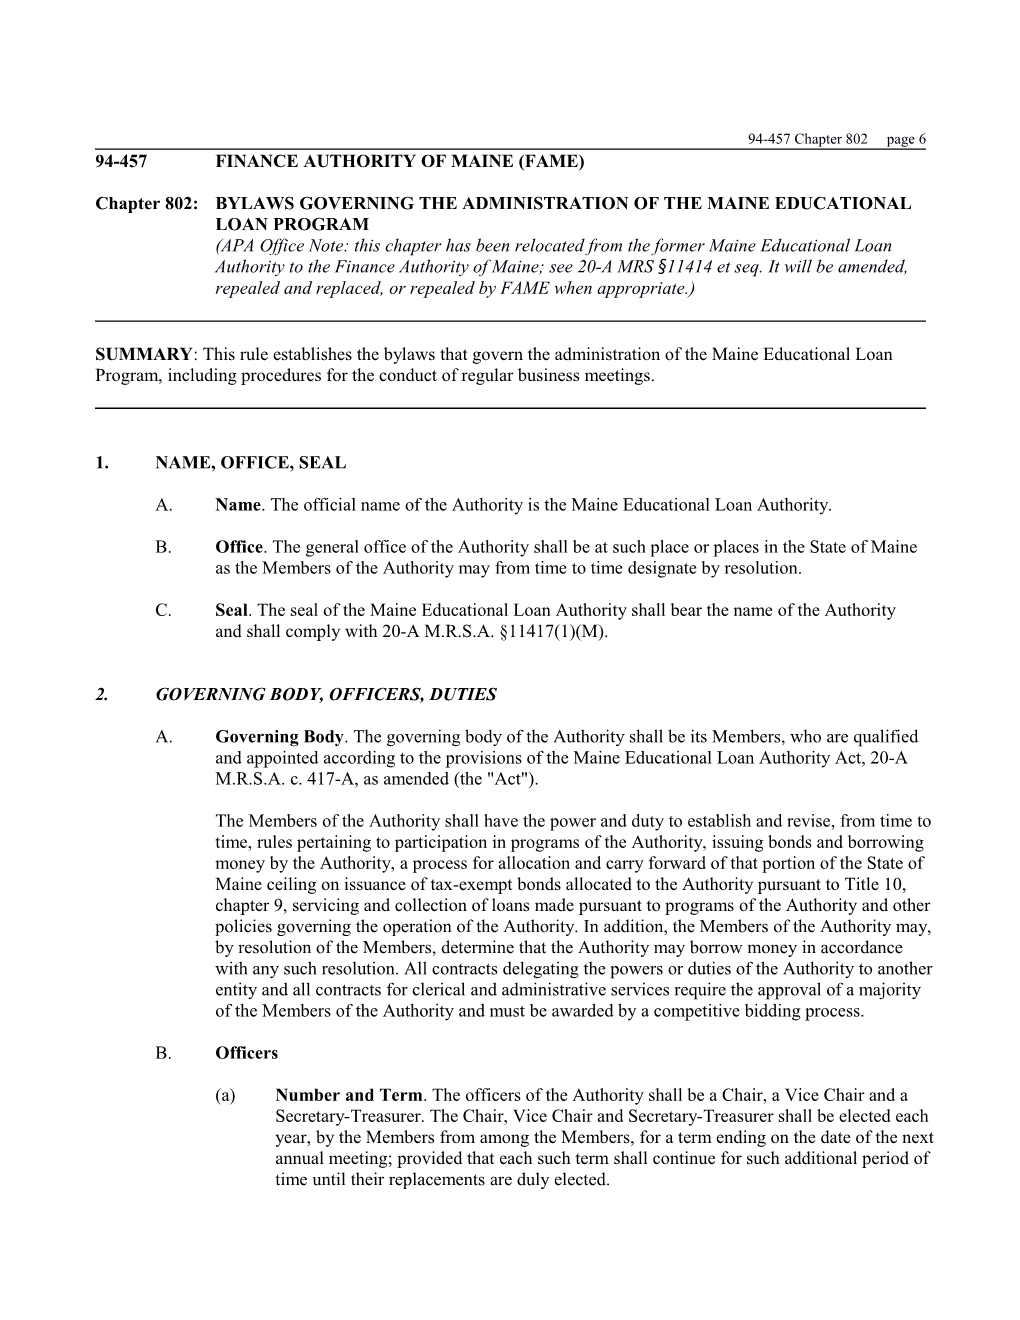 Chapter 802:BYLAWS GOVERNING the ADMINISTRATION of the MAINE EDUCATIONAL LOAN PROGRAM